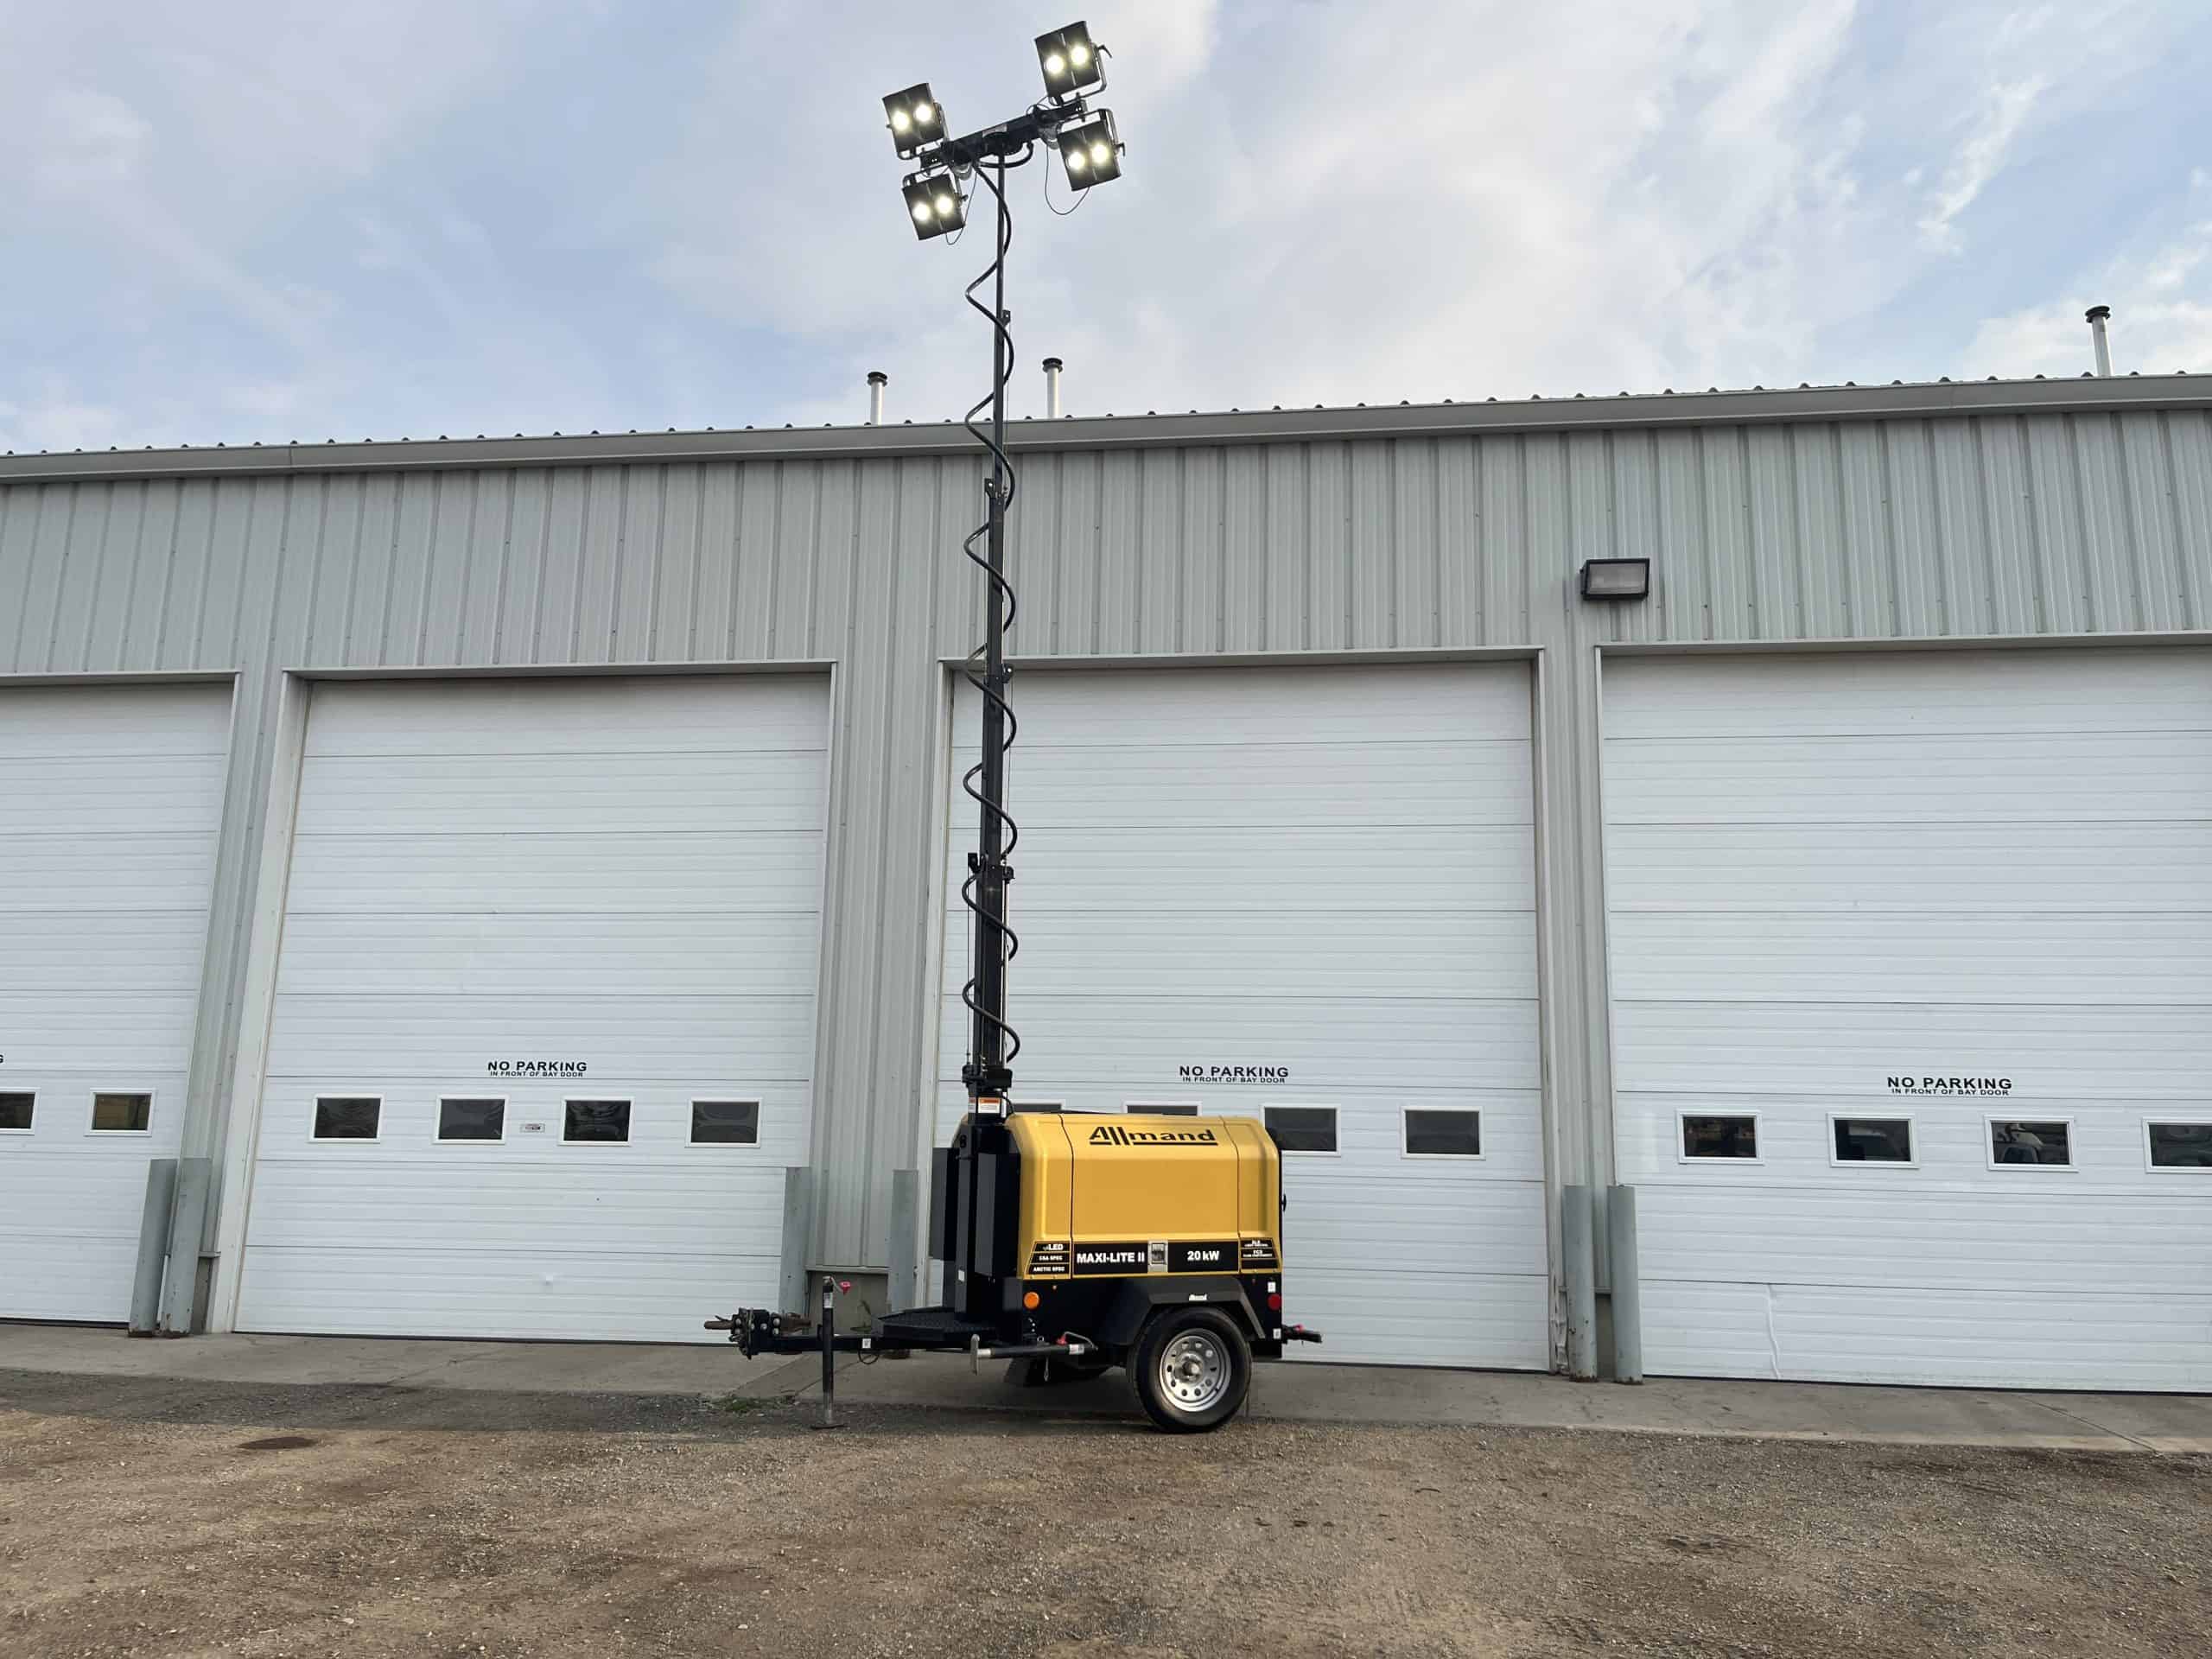 Used 20 kw Allmand Maxi-Lite 3 phase light tower & Generator for sale in Toronto, Ottawa, Thunder Bay ON.